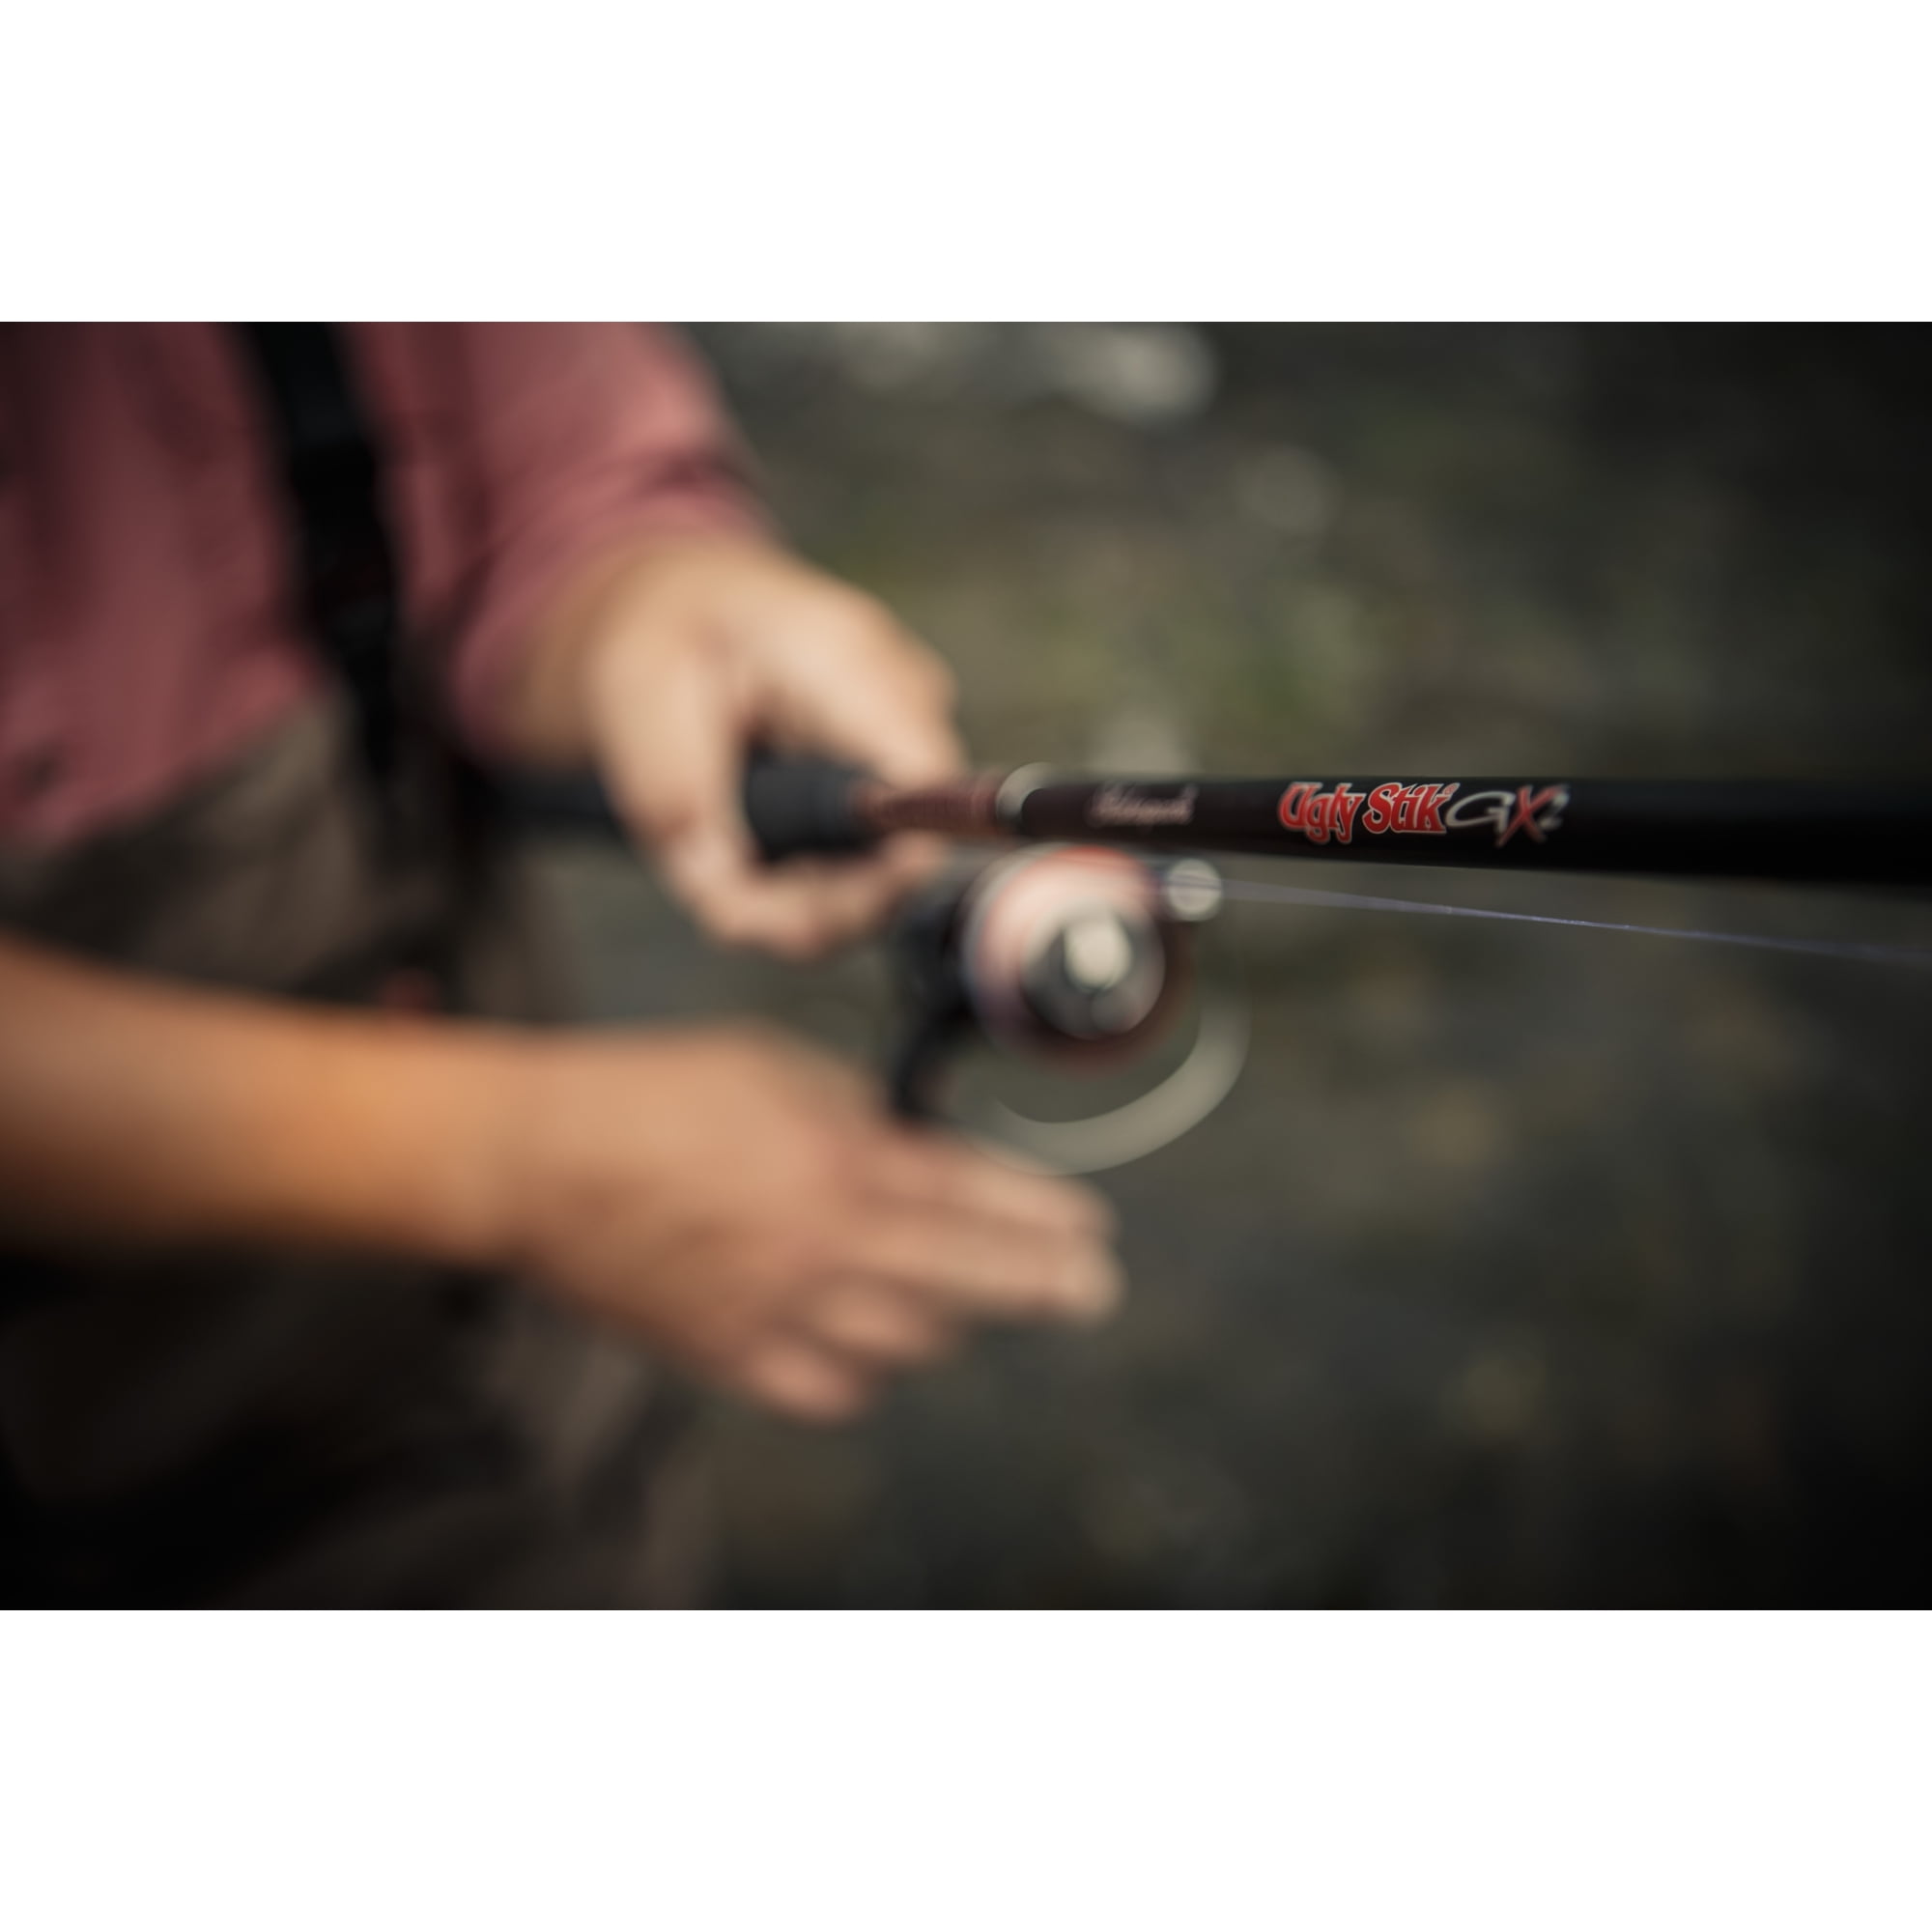 Ugly Stik 4'8” GX2 Spinning Fishing Rod and Reel Spinning Combo